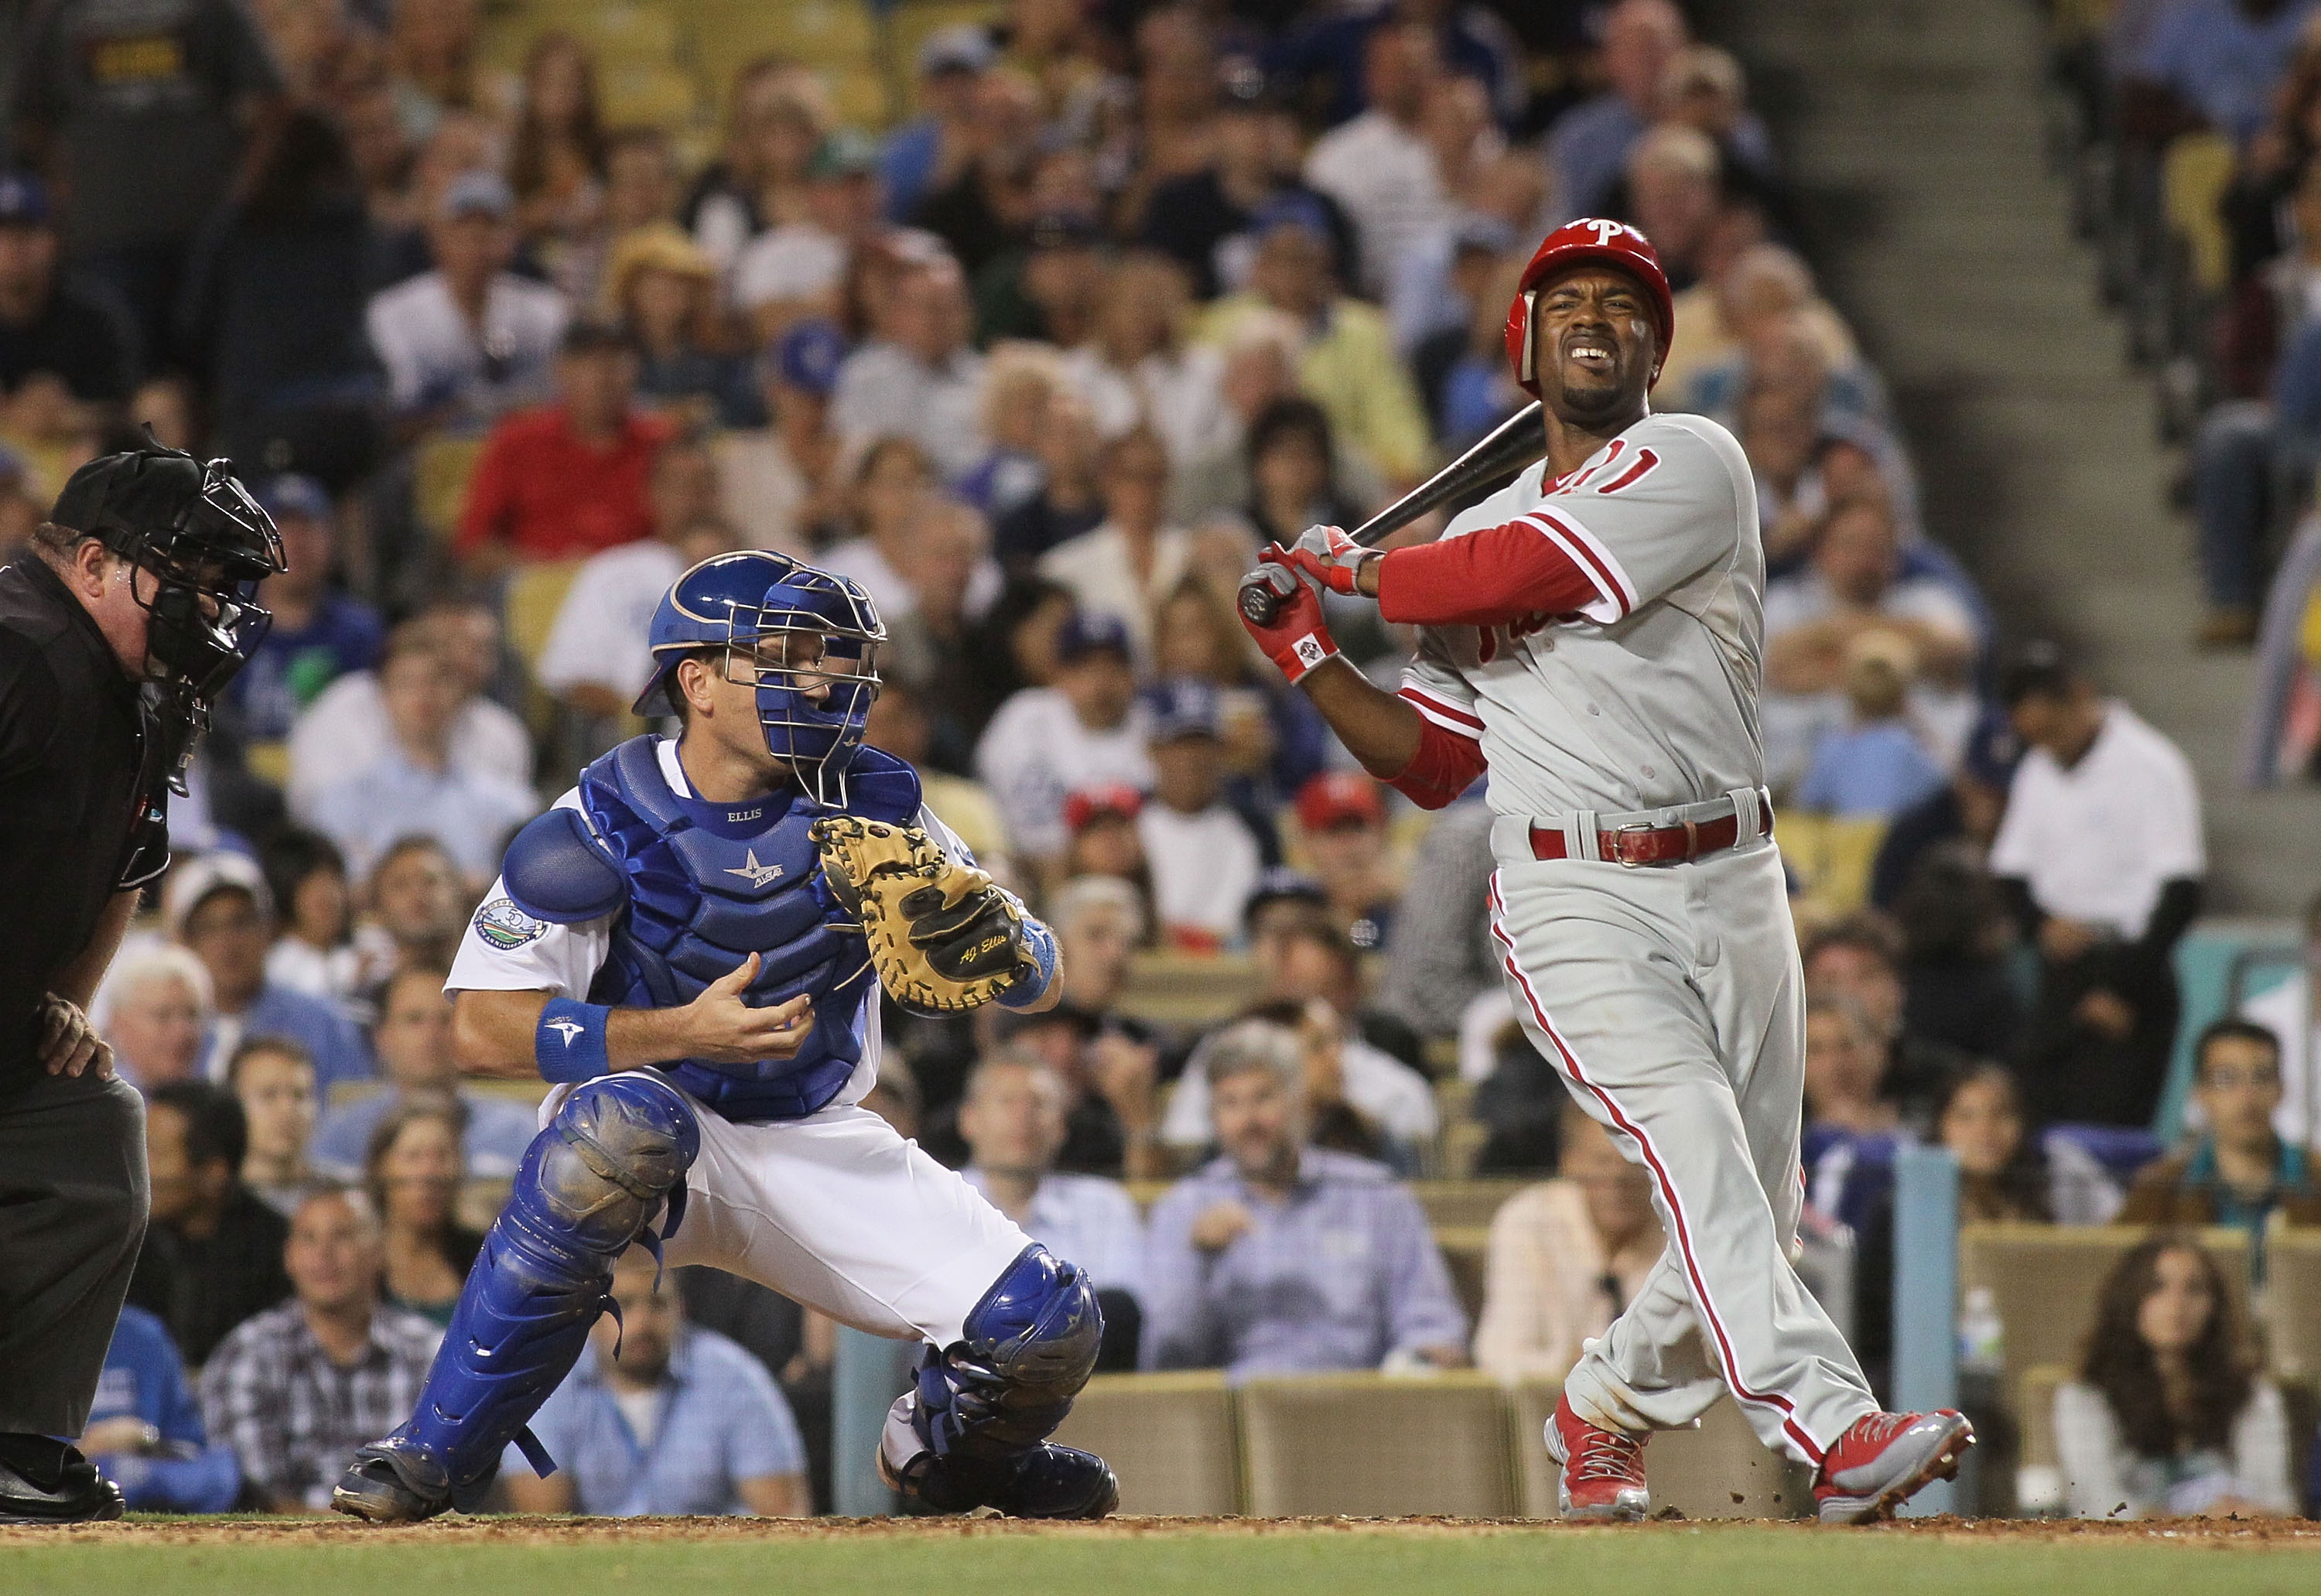 Jimmy Rollins #11 of the Philadelphia Phillies strikes out swinging in the fifth inning against the Los Angeles Dodgers during the MLB game at Dodger Stadium on July 17, 2012 in Los Angeles, California. (Photo by Victor Decolongon/Getty Images) 